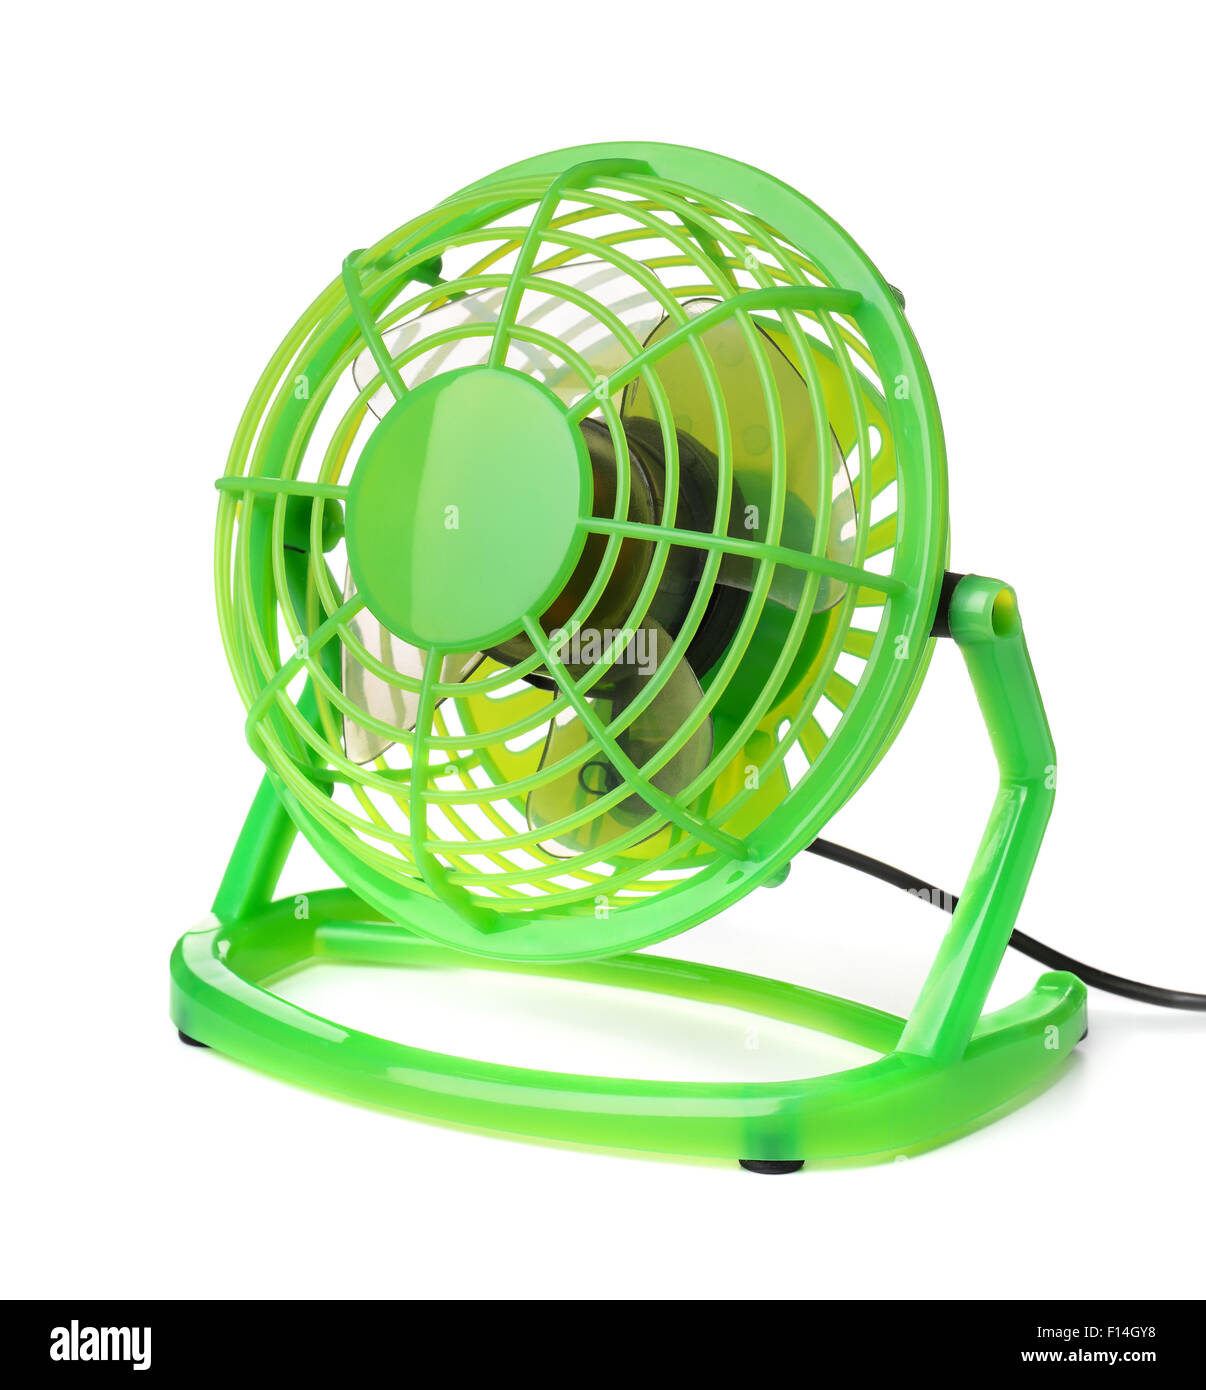 Green plastic electric fan isolated on white Stock Photo - Alamy